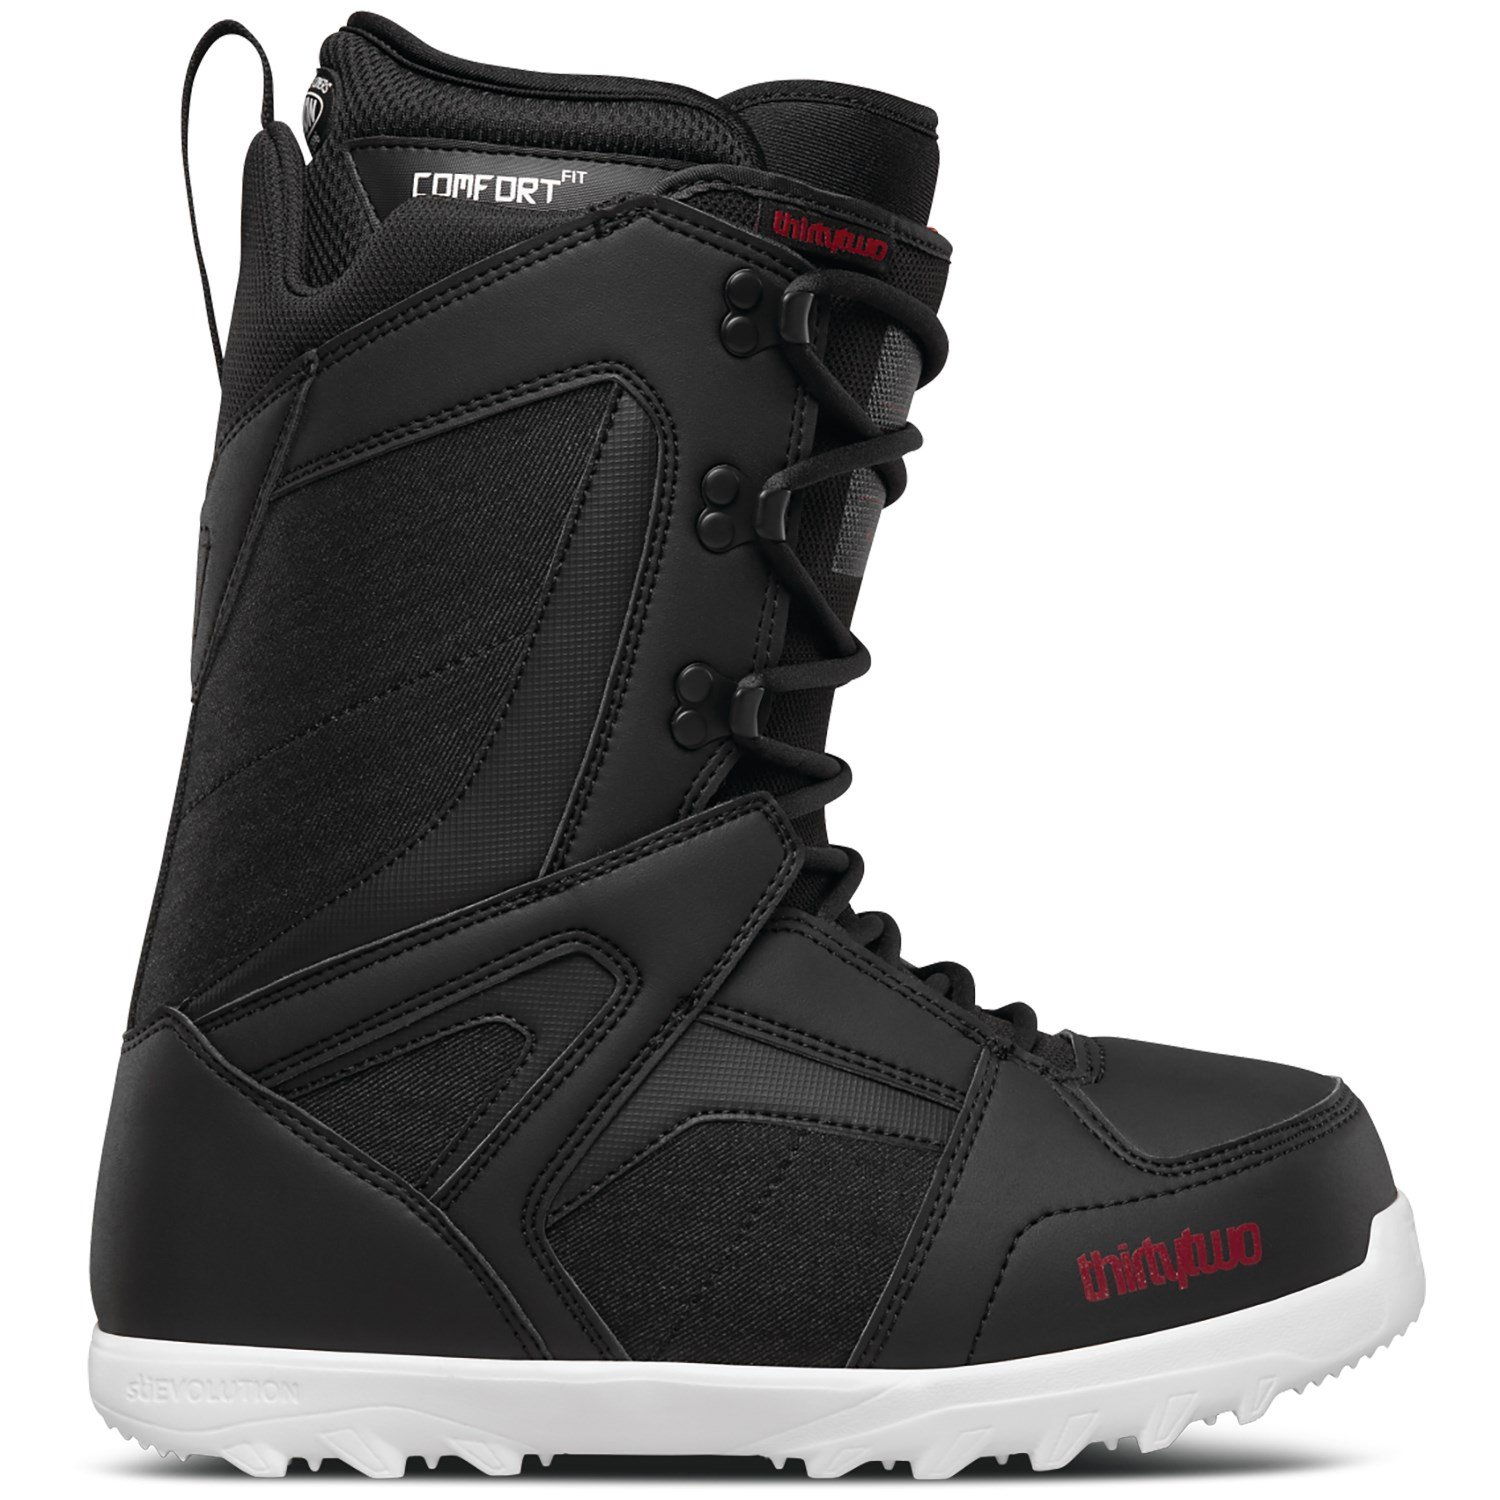 ThirtyTwo 32 Prion 18 Snowboard Boot Mens